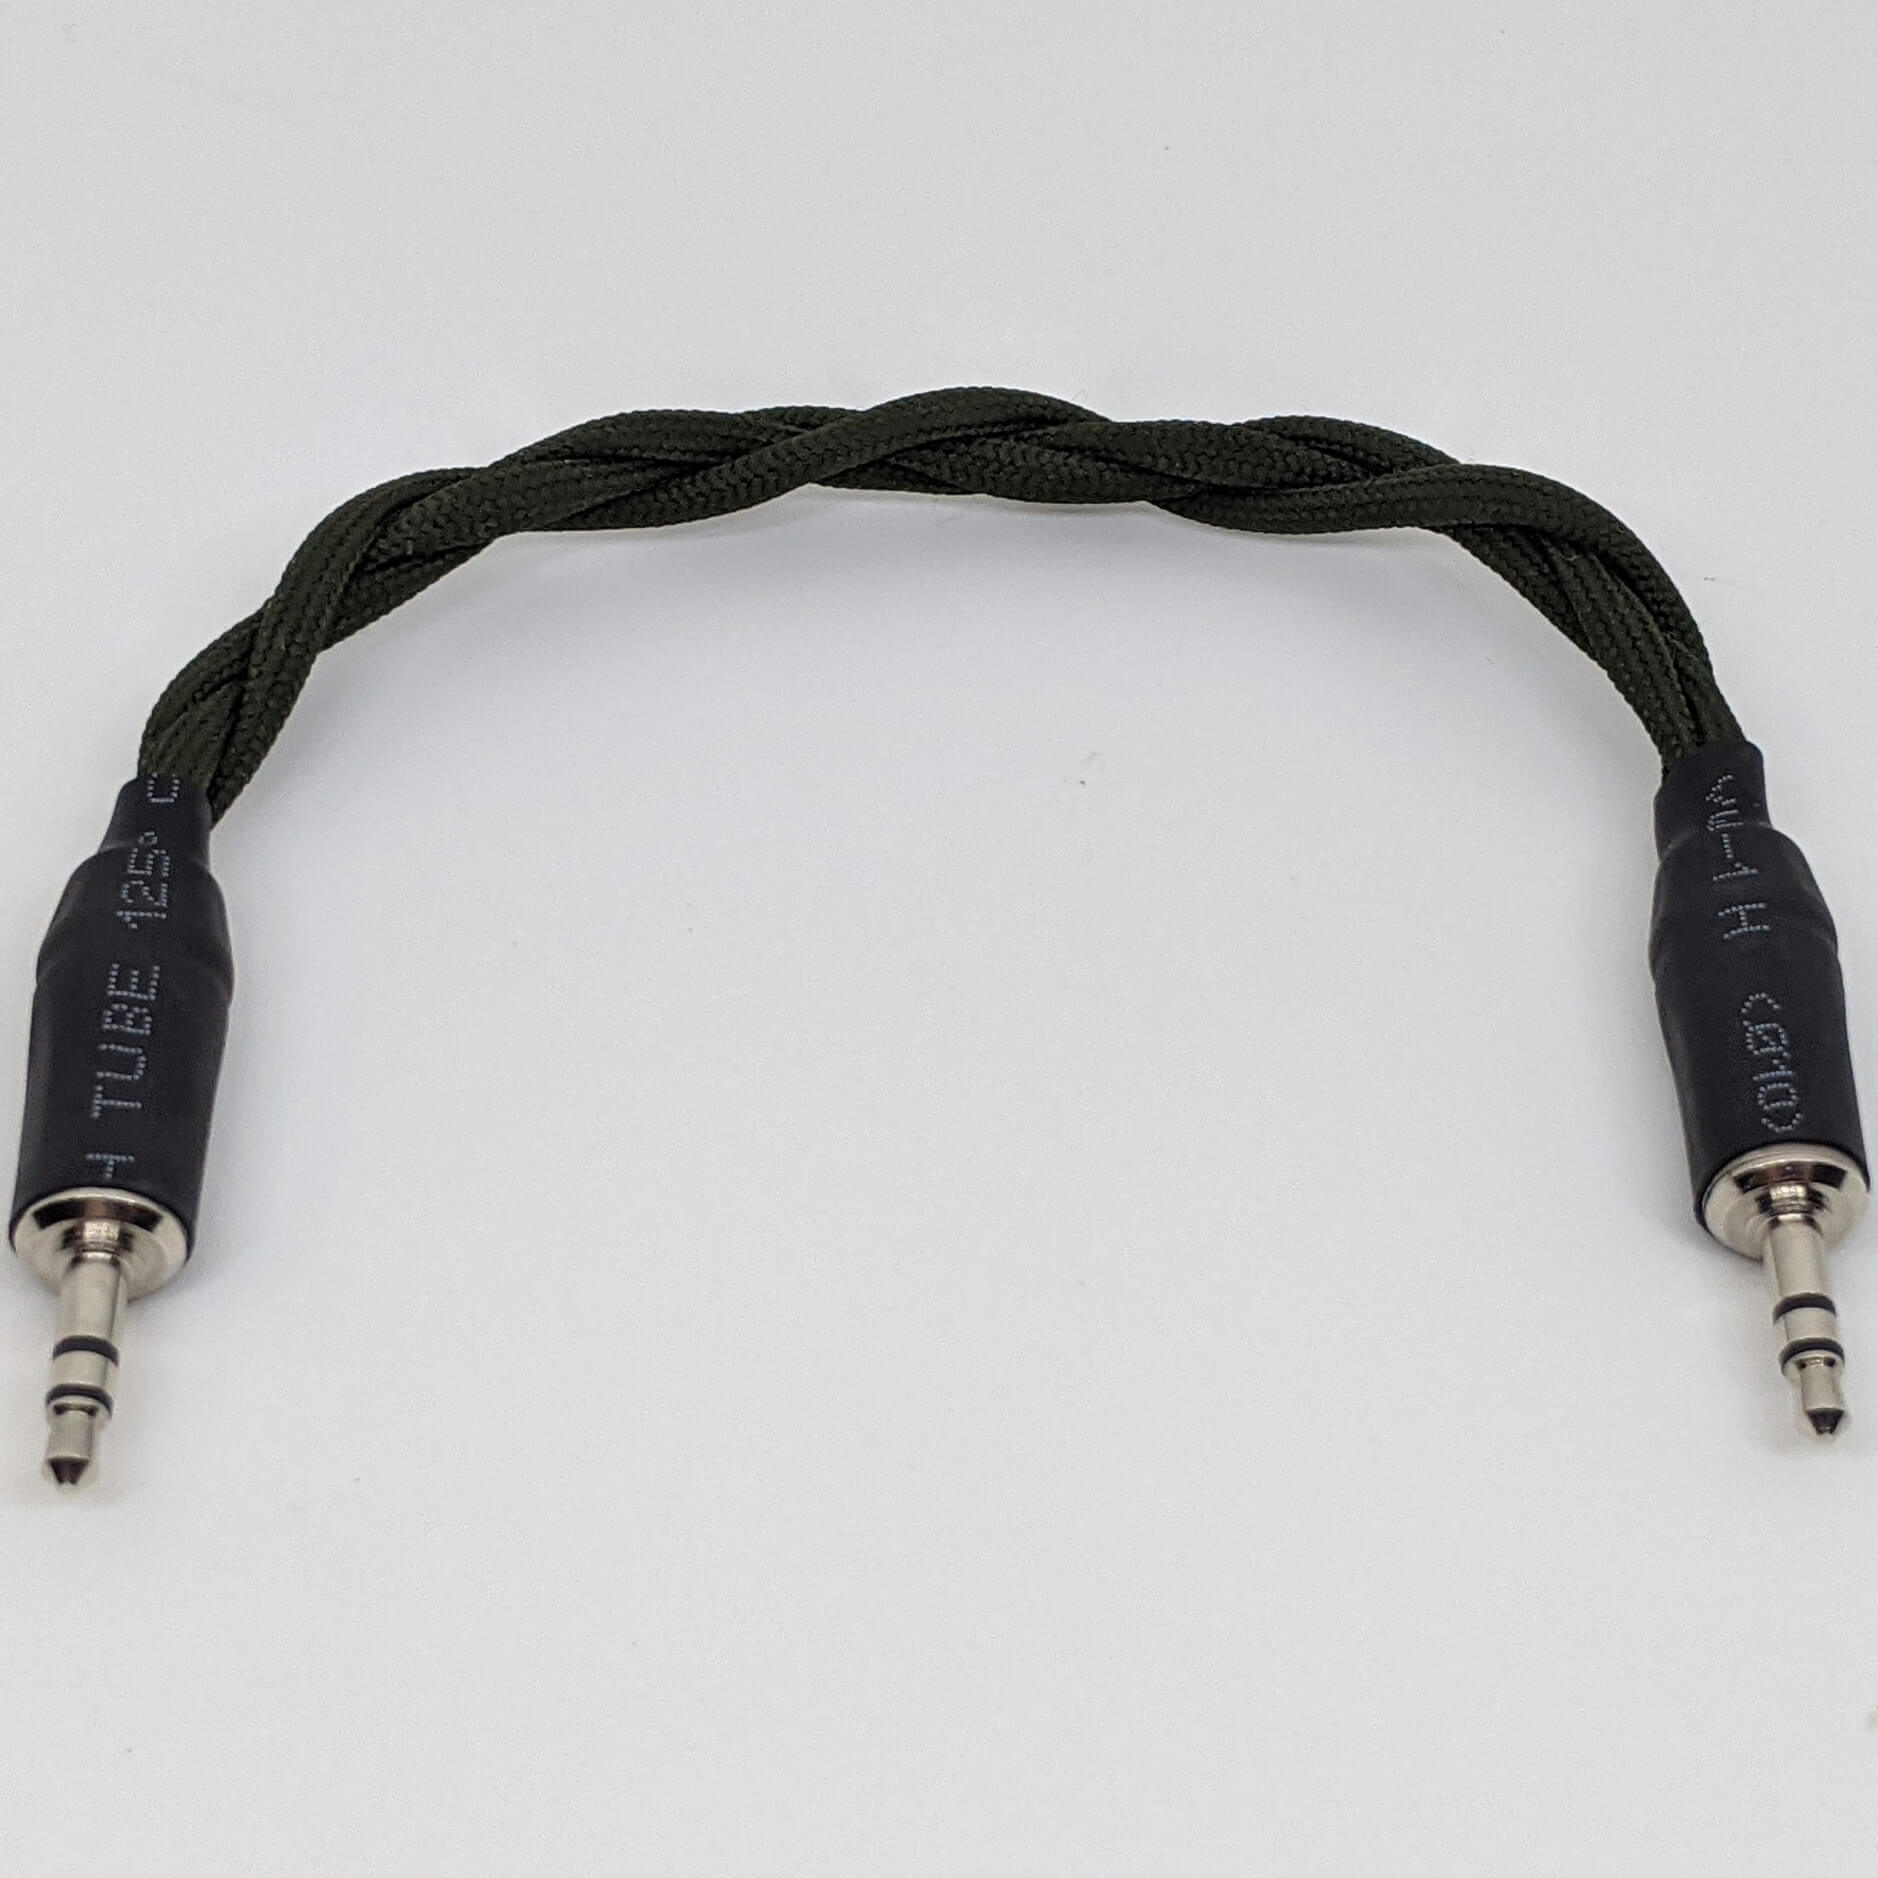 Buy Ear Audio 3.5mm Stereo Male to 3.5mm Stereo Male Interconnect at HiFiNage in India with warranty.